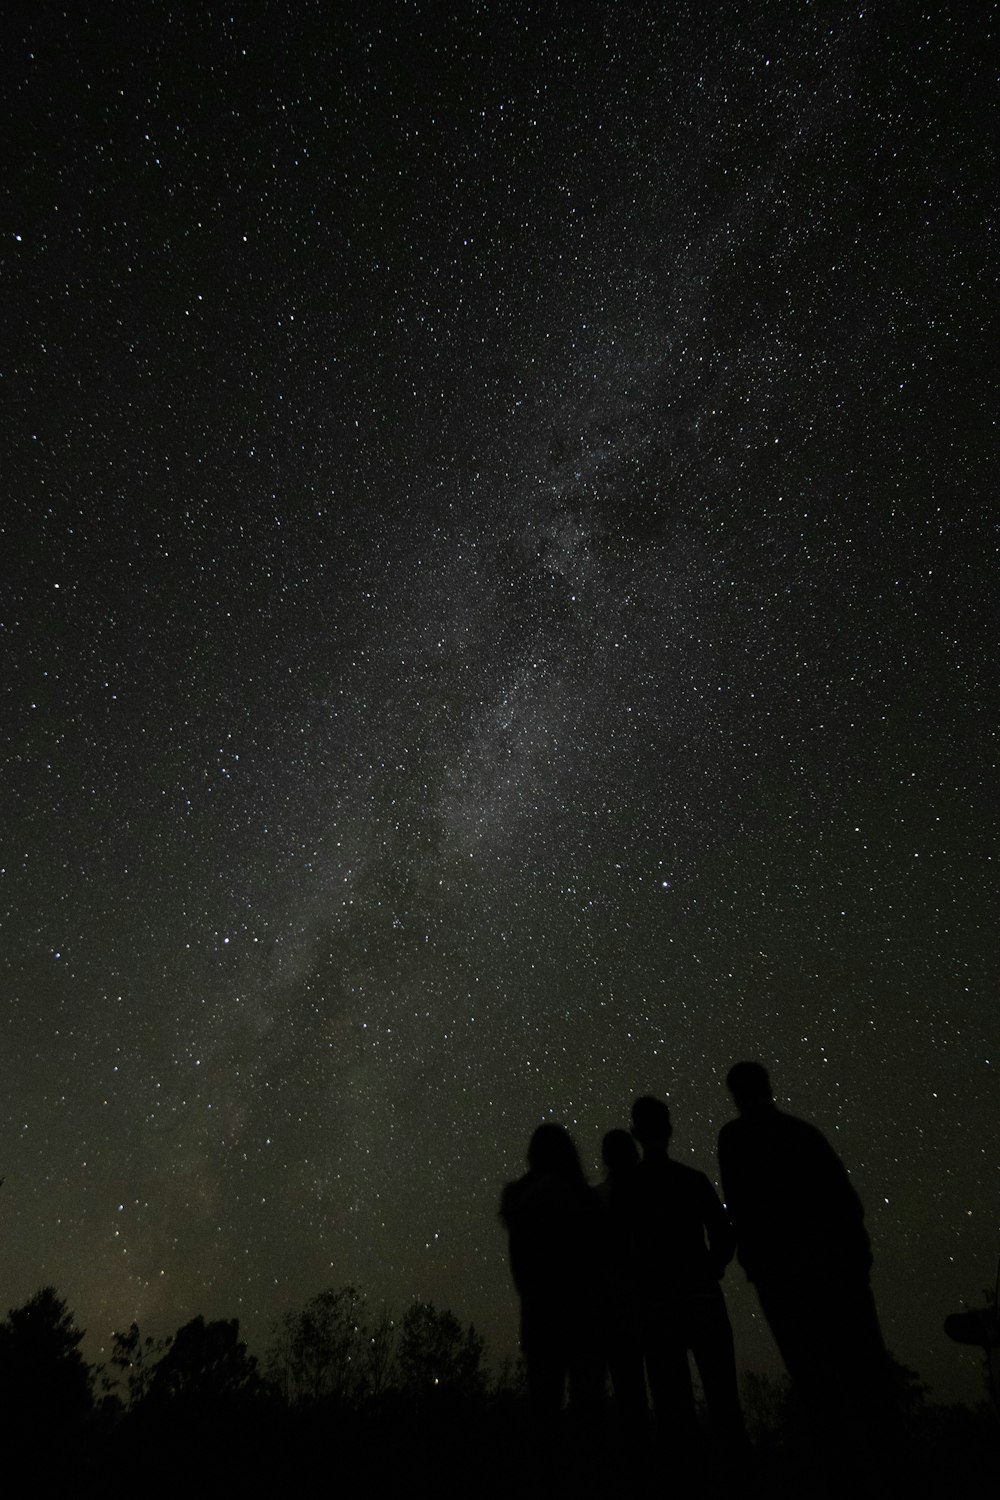 silhouette of people under starry night